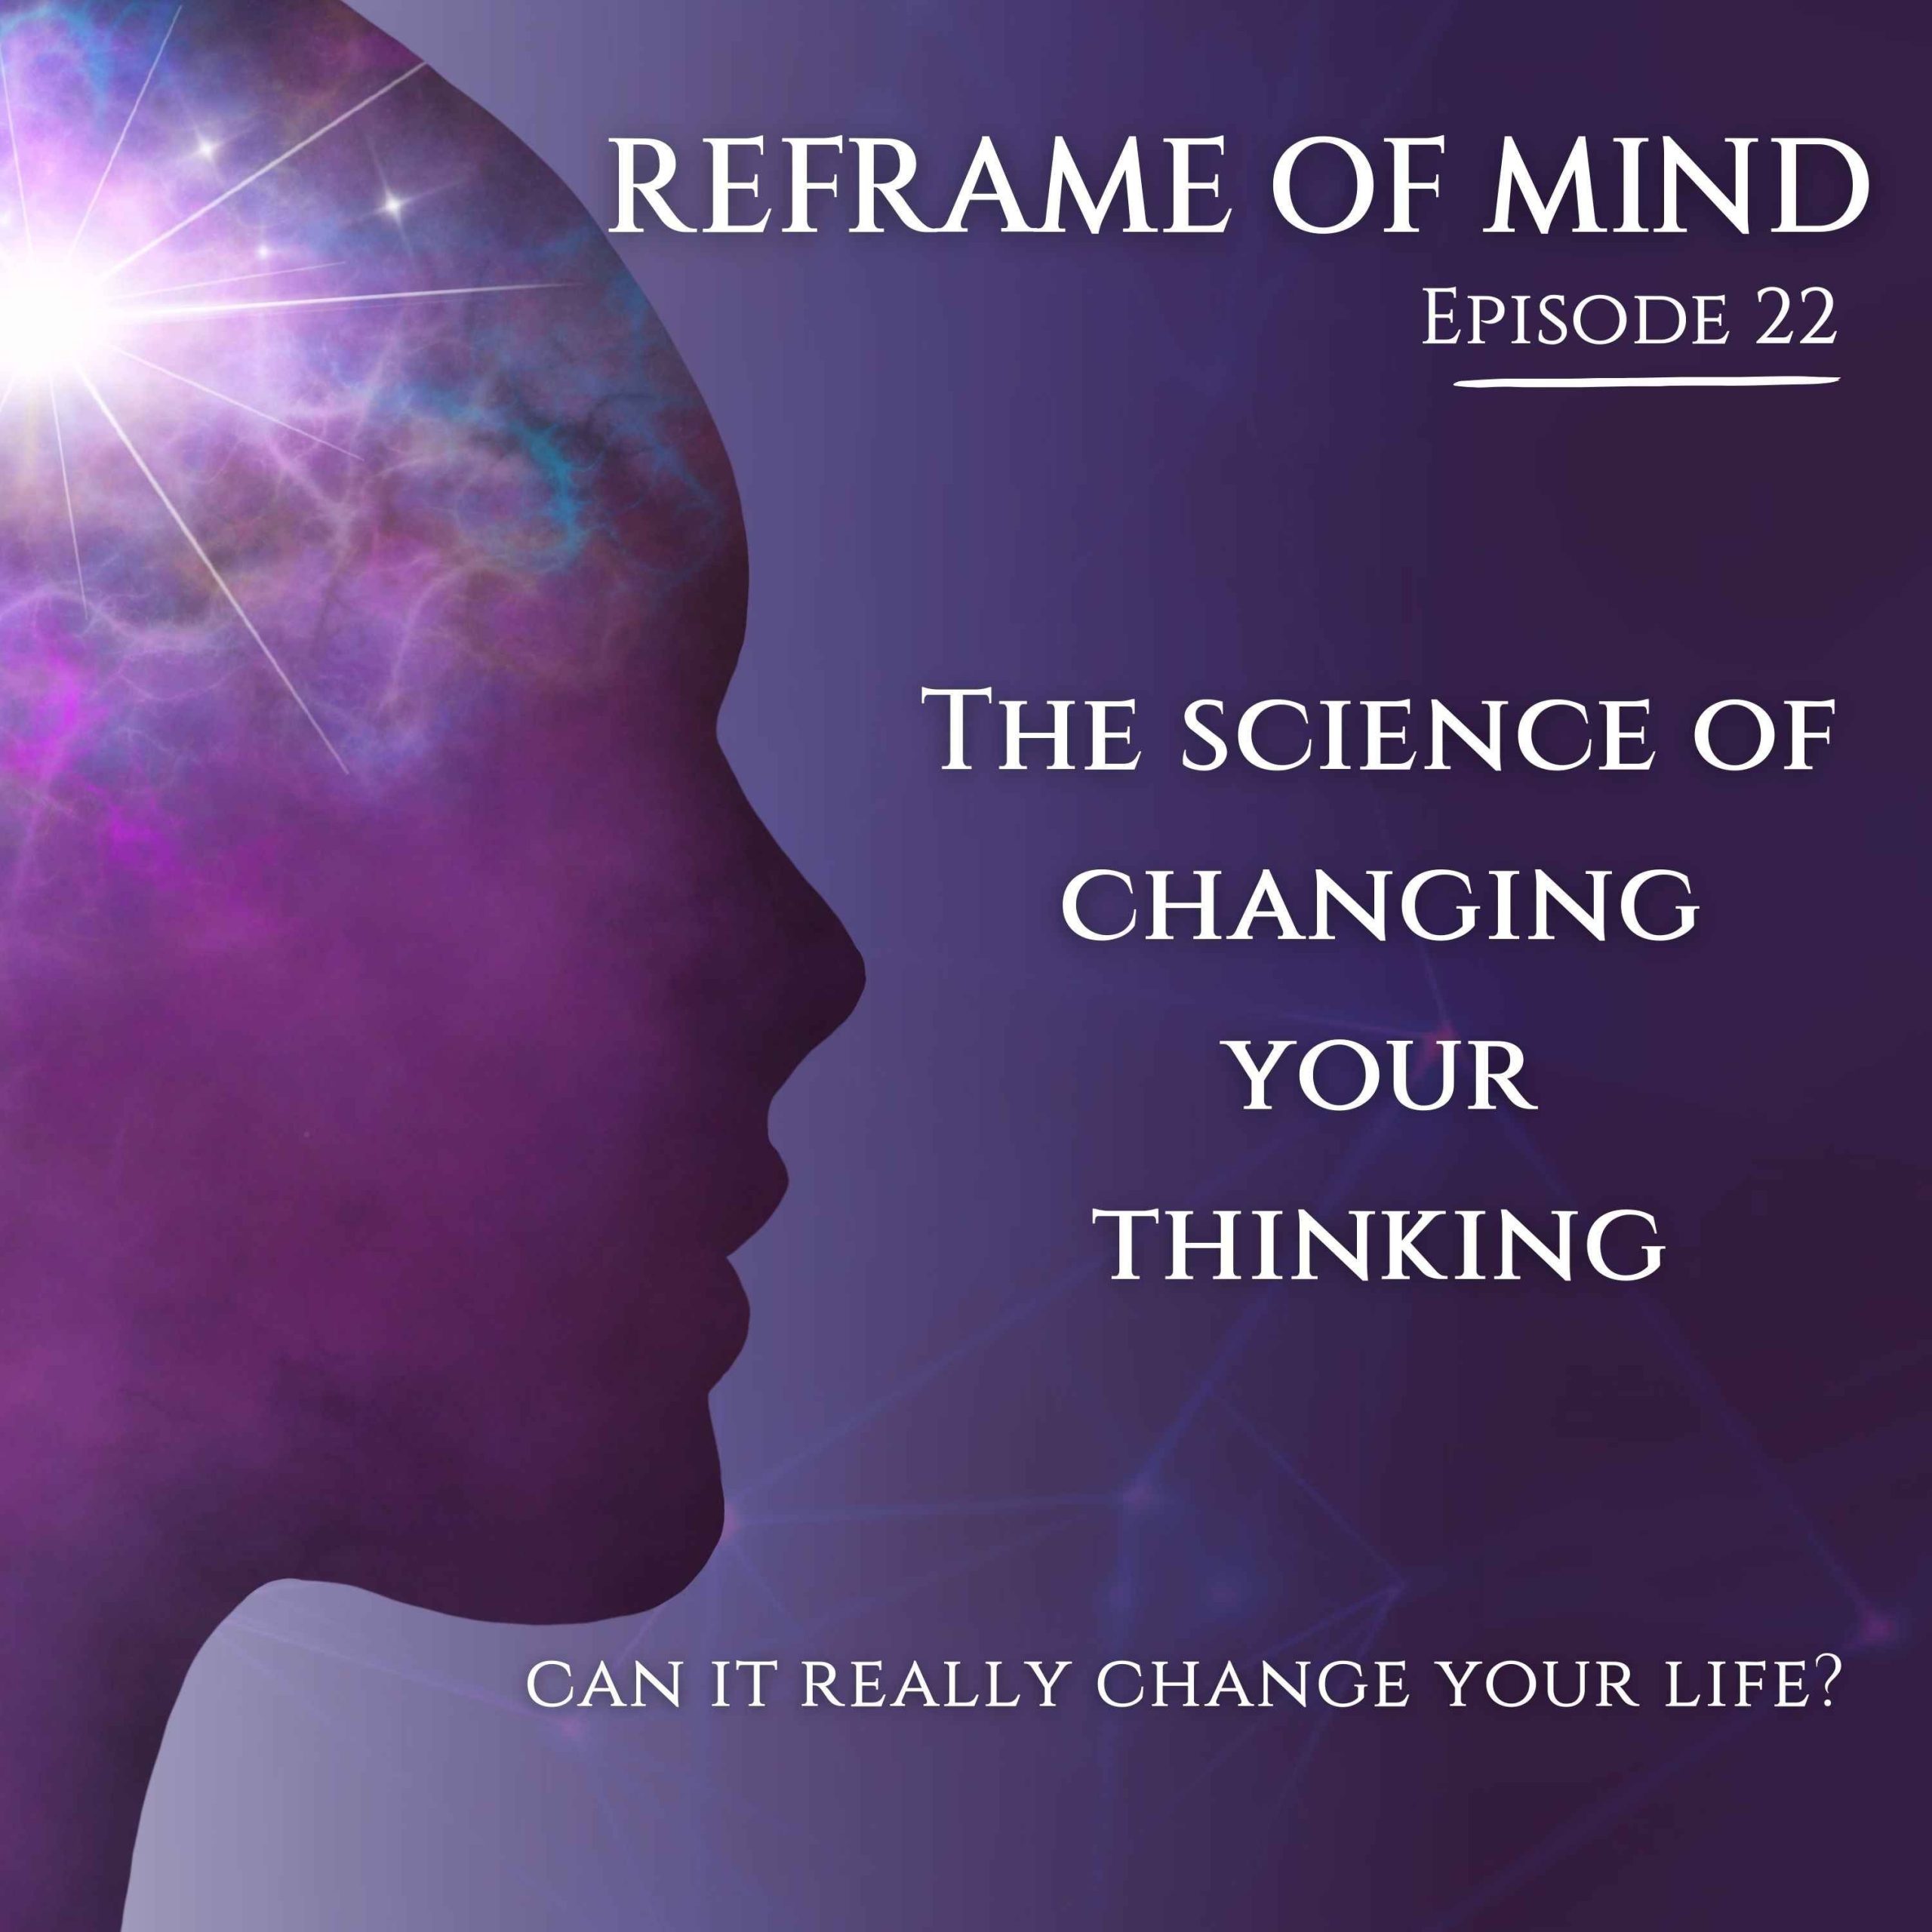 The science of changing your thinking